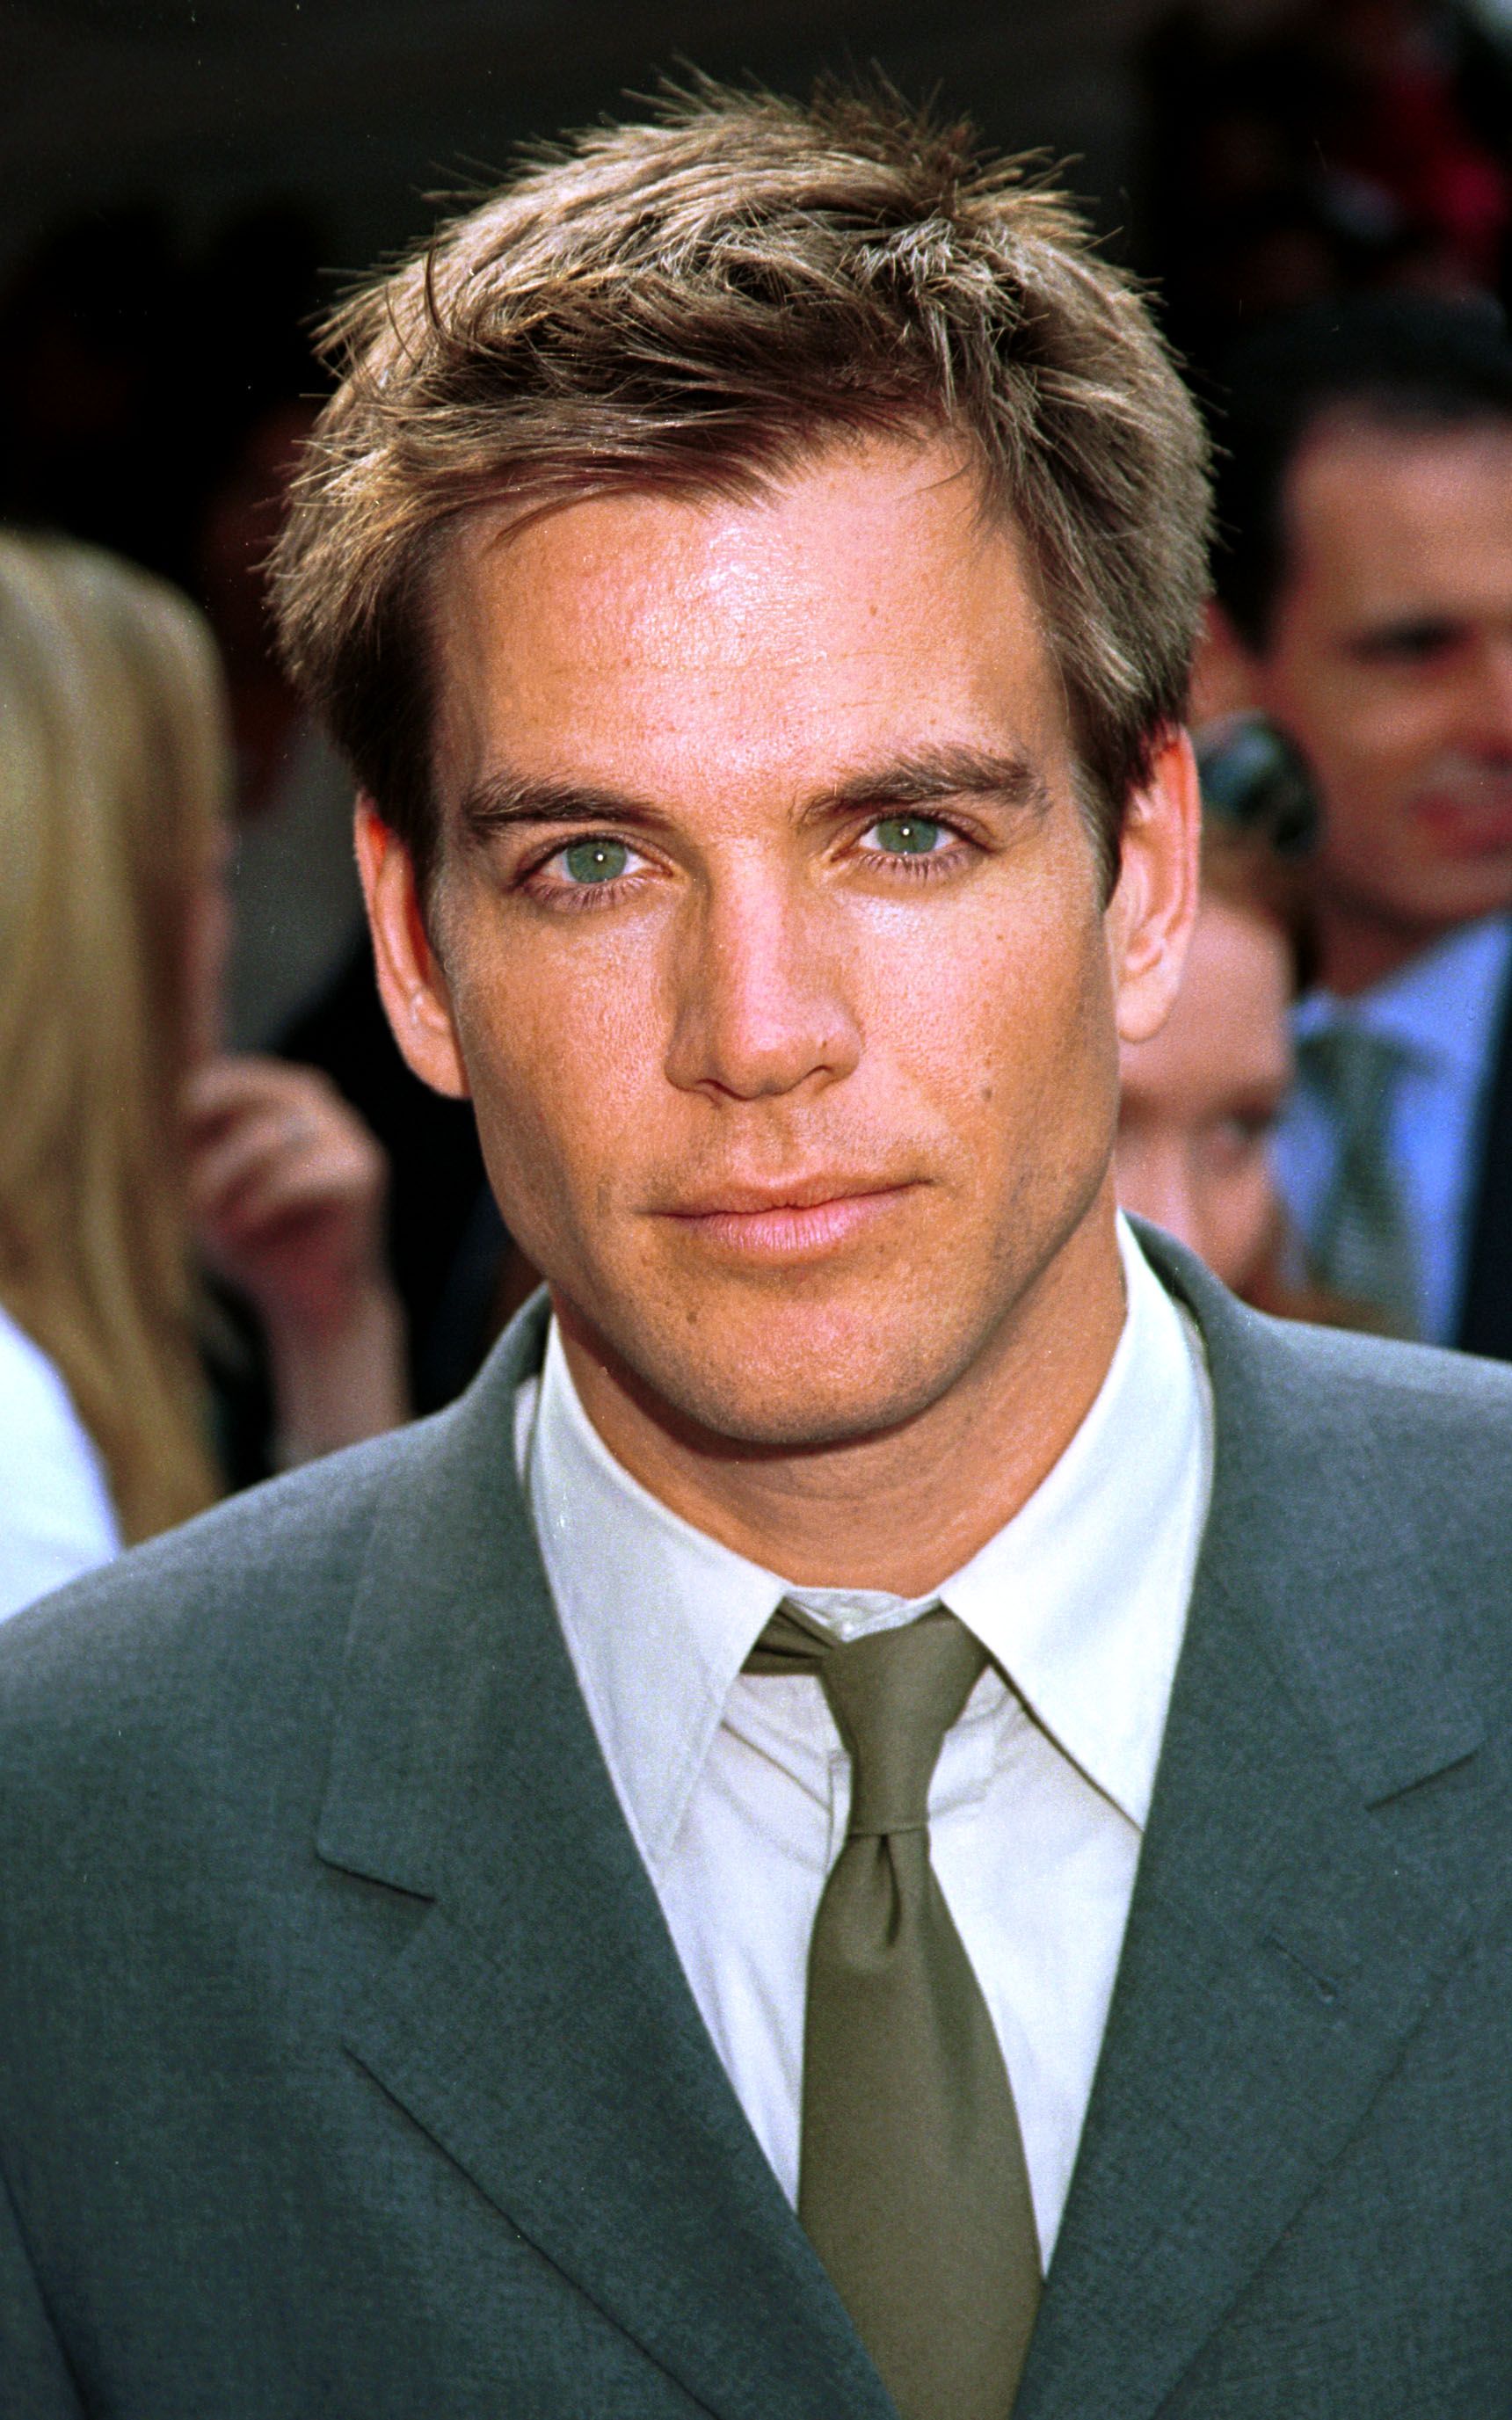 Michael Weatherly at the Fox Network "Fall Lineup," on May 18, 2000, in New York. | Source: George De Sota/Liaison/Getty Images